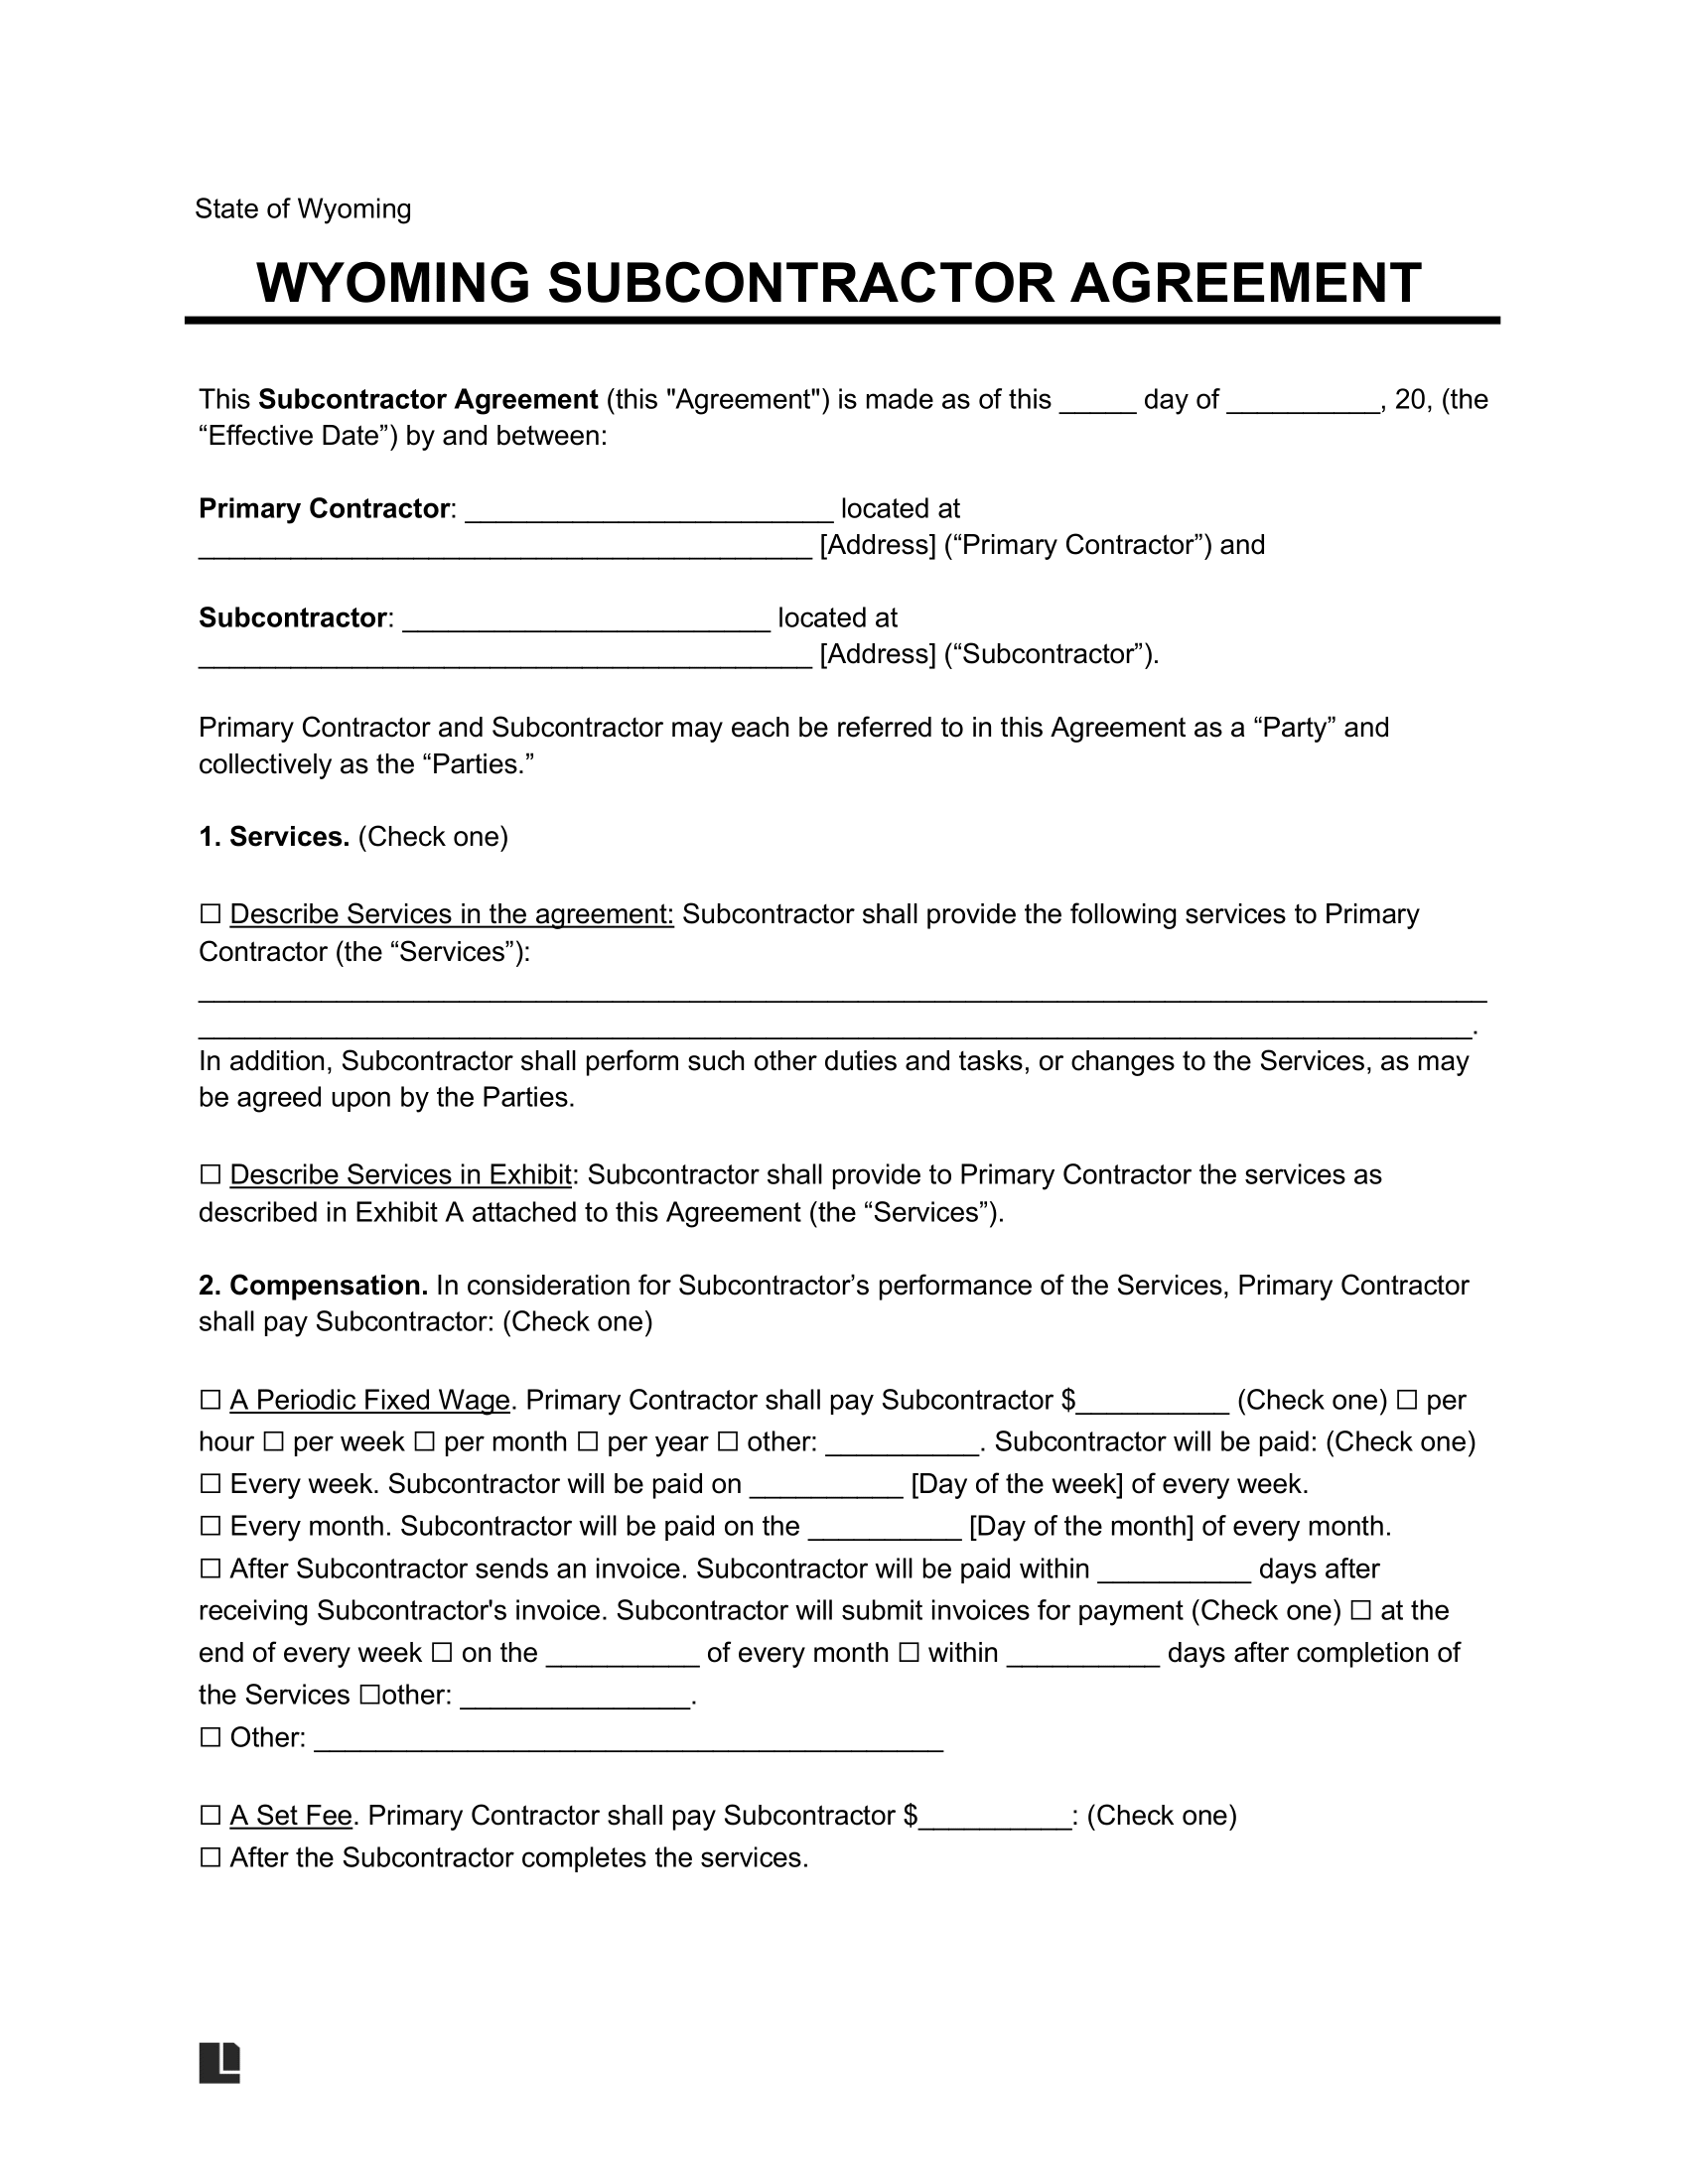 Wyoming Subcontractor Agreement Template